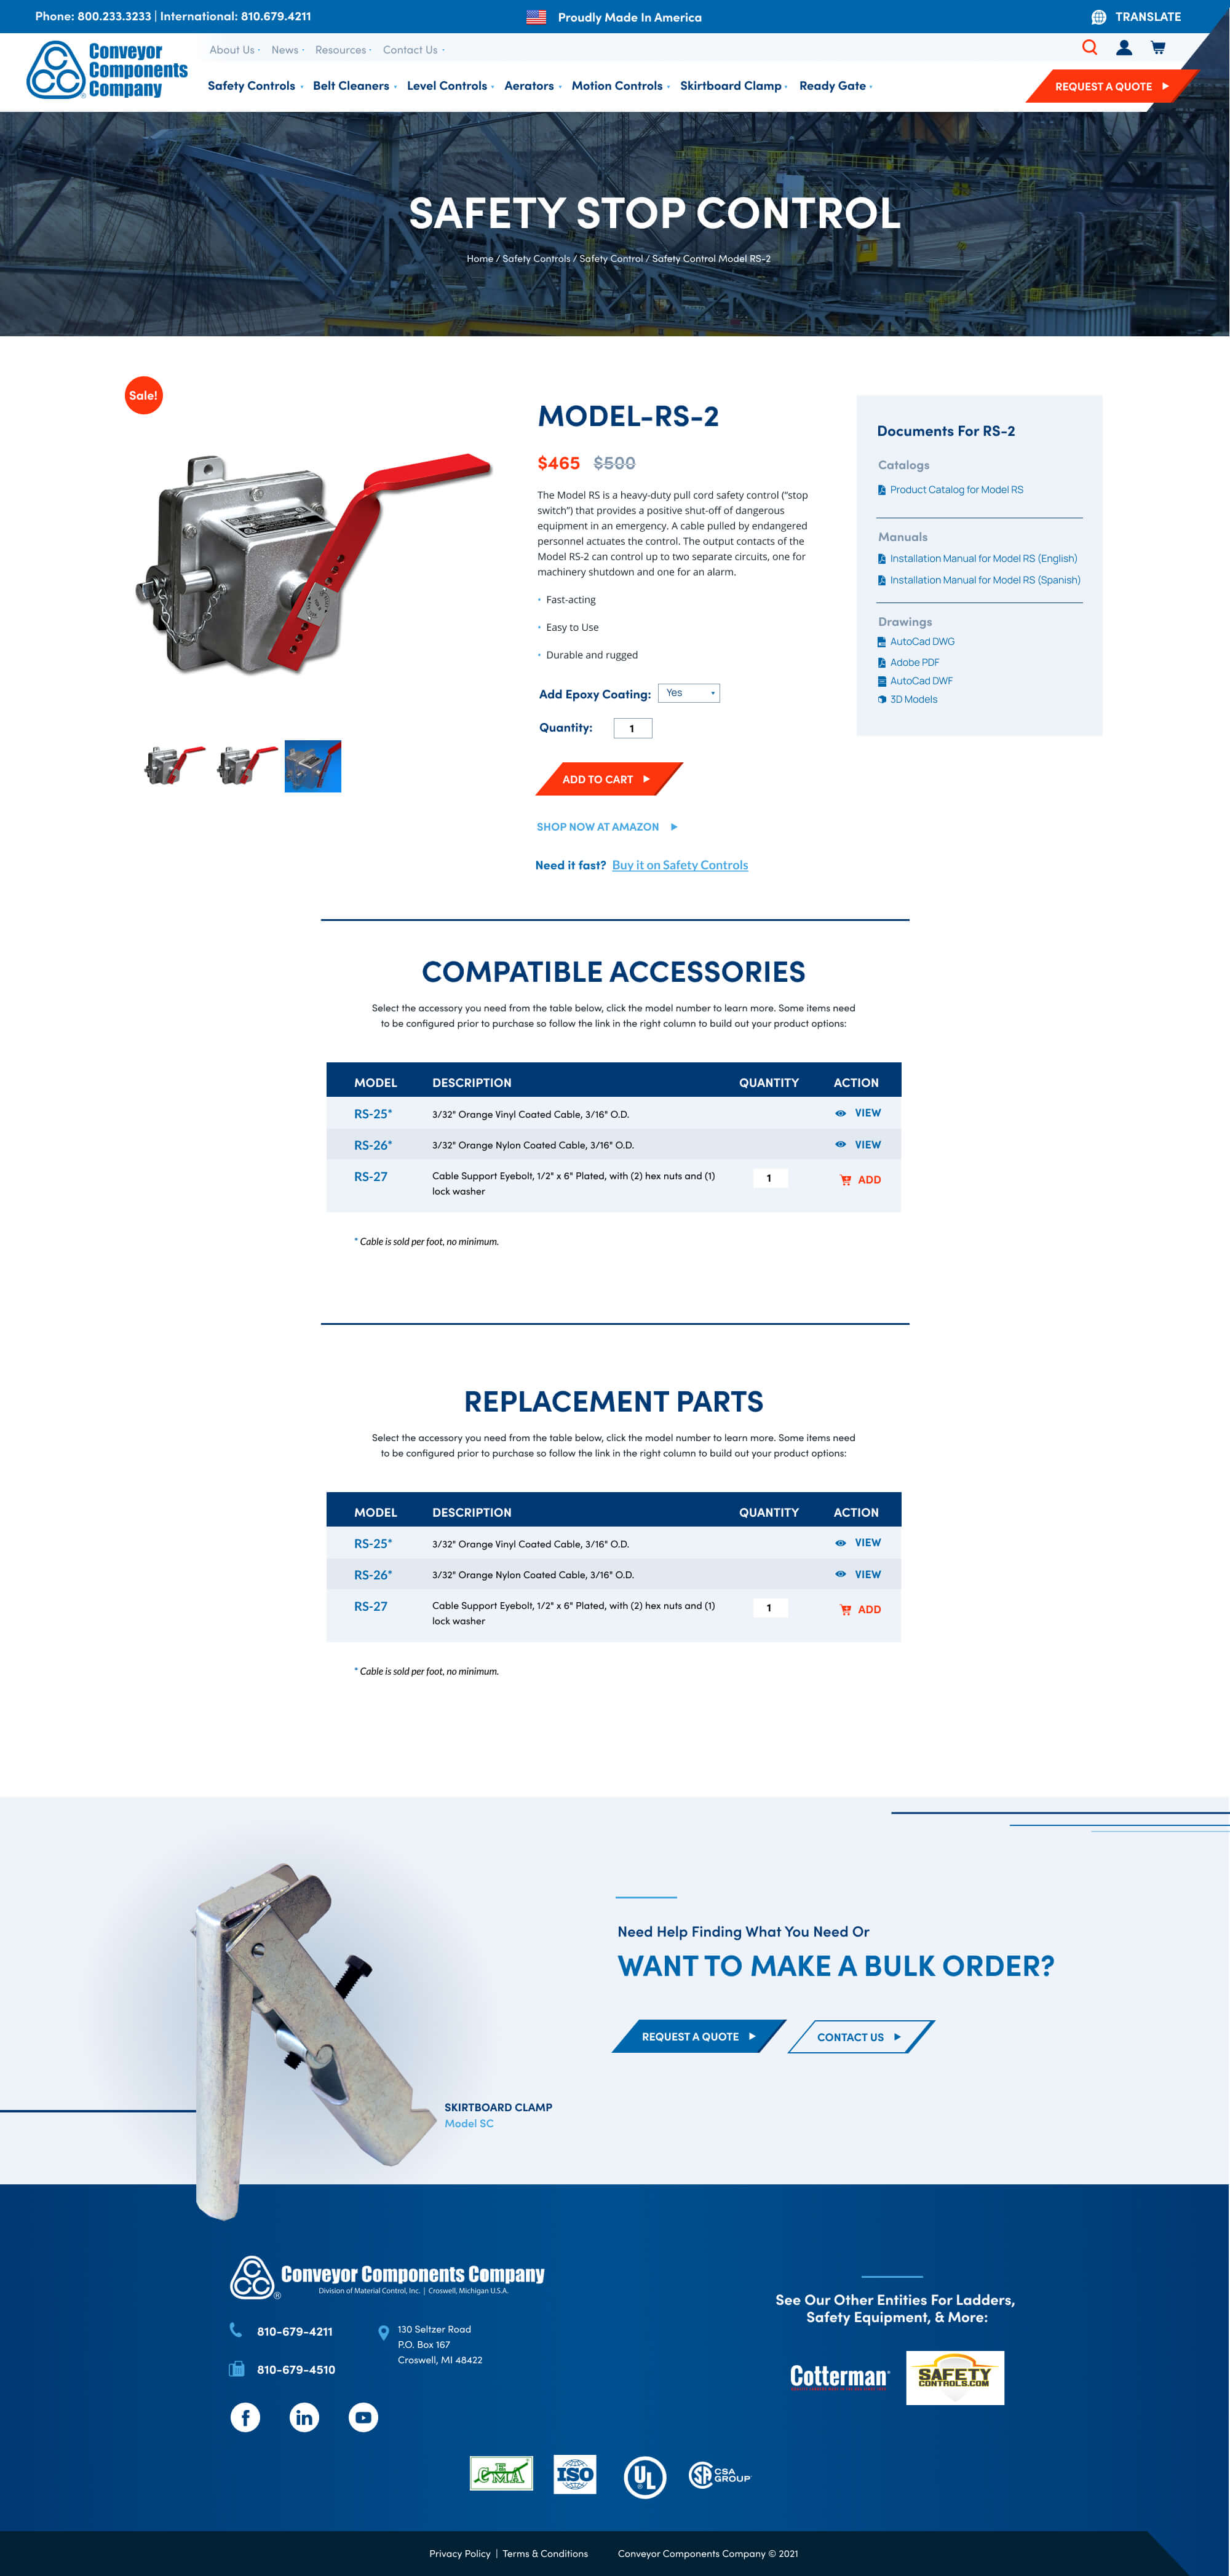 Conveyor Components Company website page of the Safety Stop Control product page for Model-RS-2.